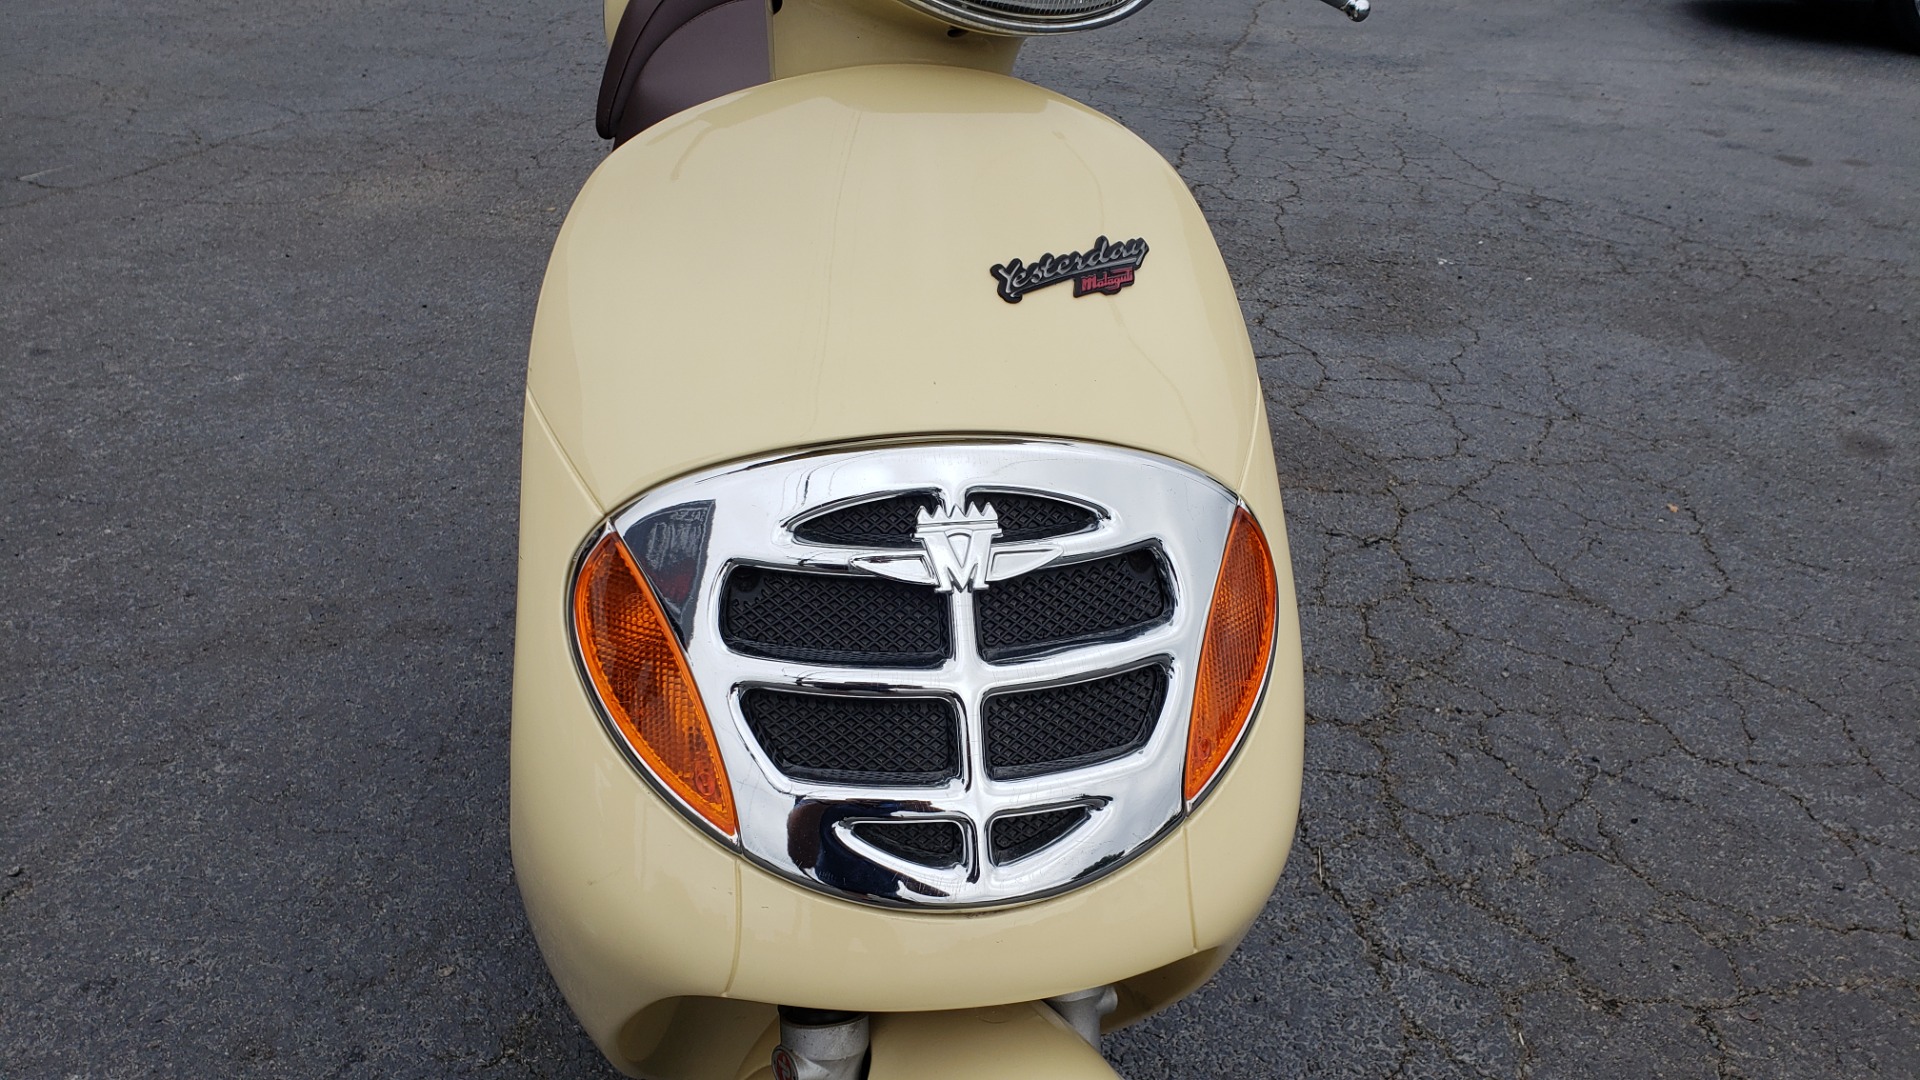 Used 2002 MALAGUTI YESTERDAY 50CC SCOOTER - INCLUDES HELMET for sale Sold at Formula Imports in Charlotte NC 28227 11